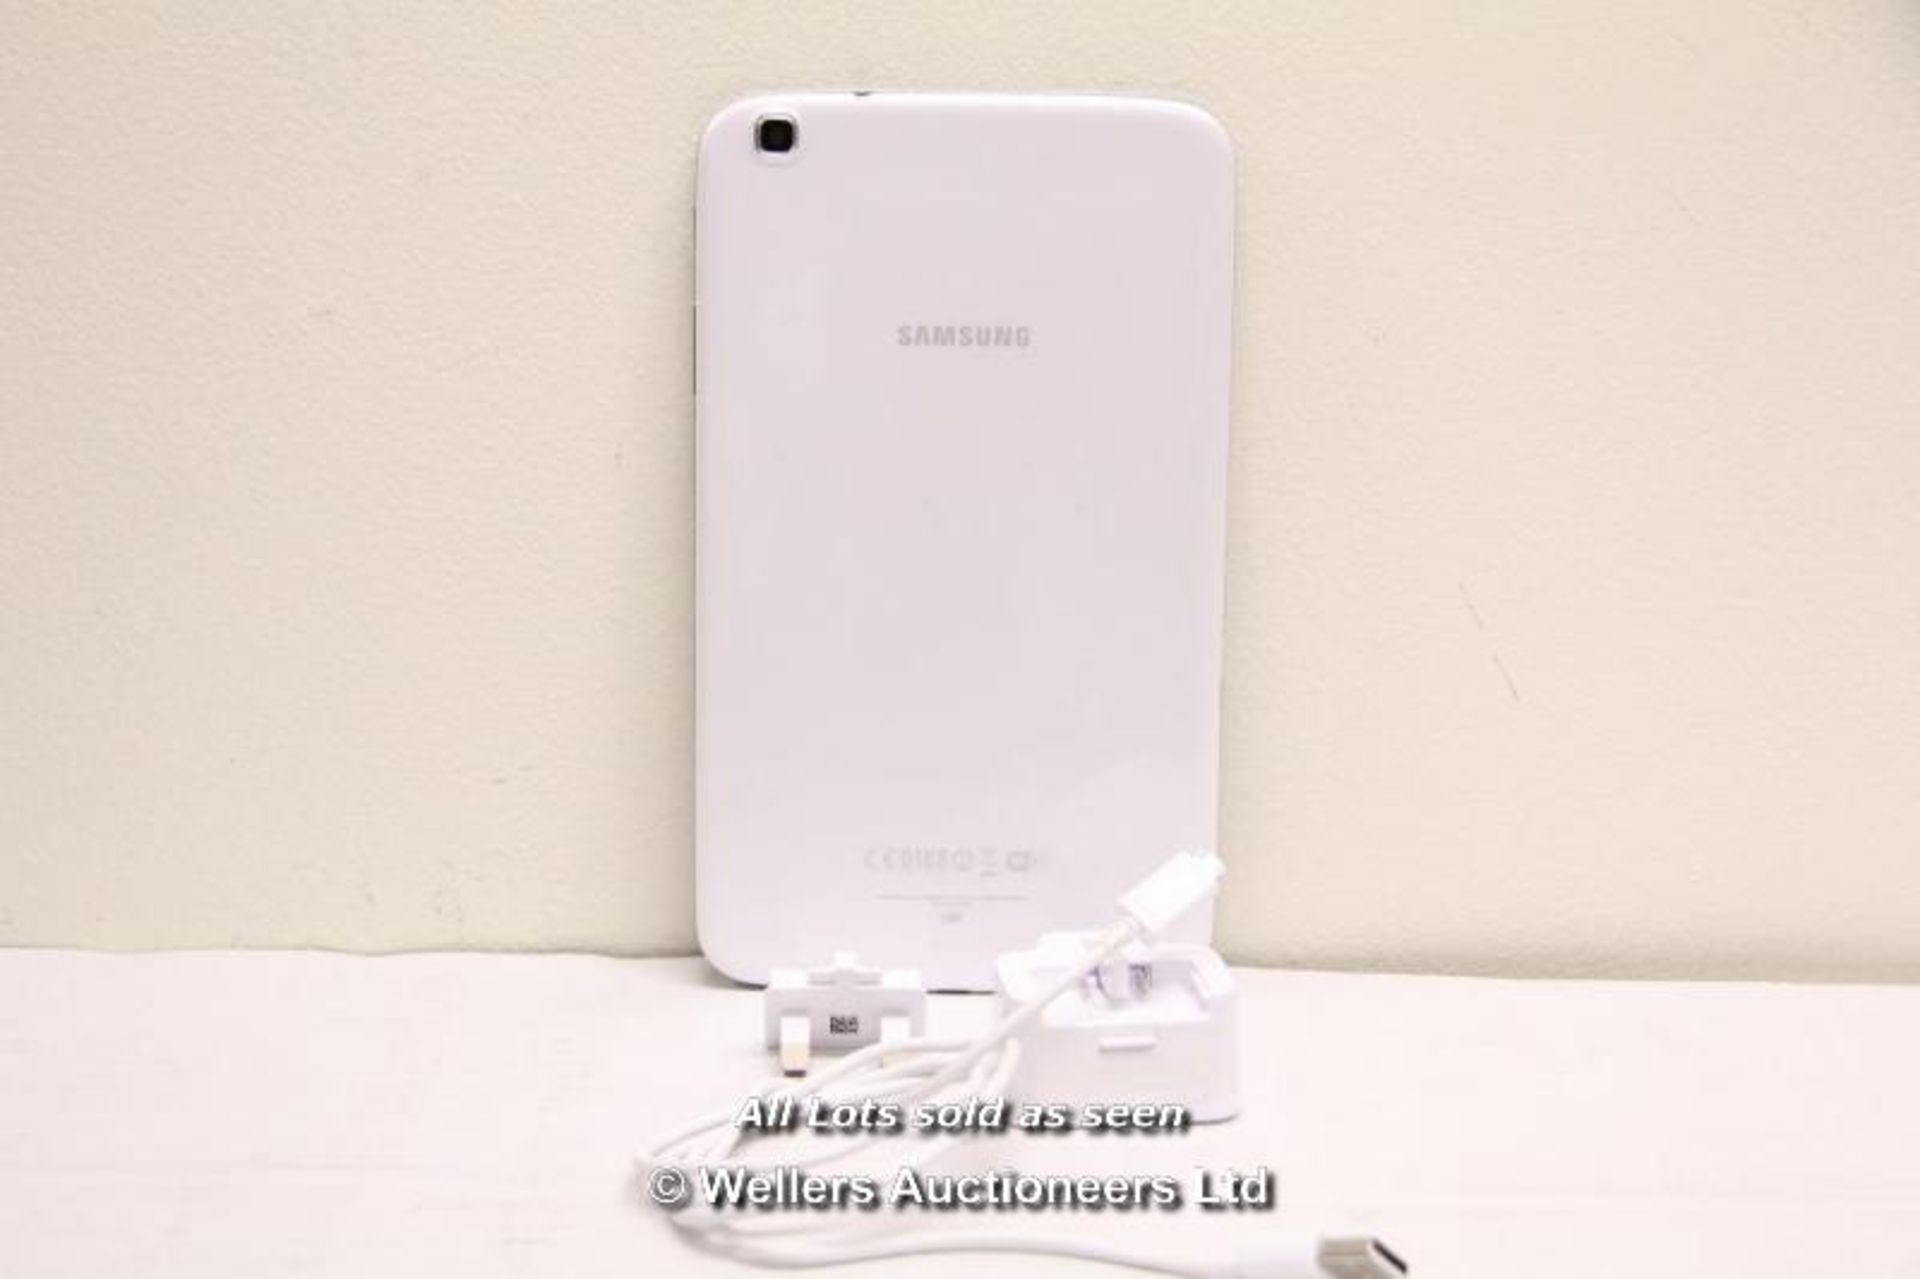 SAMSUNG GALAXY TAB 3 SM-T310 16GB WI-FI  8" - WHITE (36063946) / INCLUDING CHARGER AND USB CABLE / - Image 2 of 2